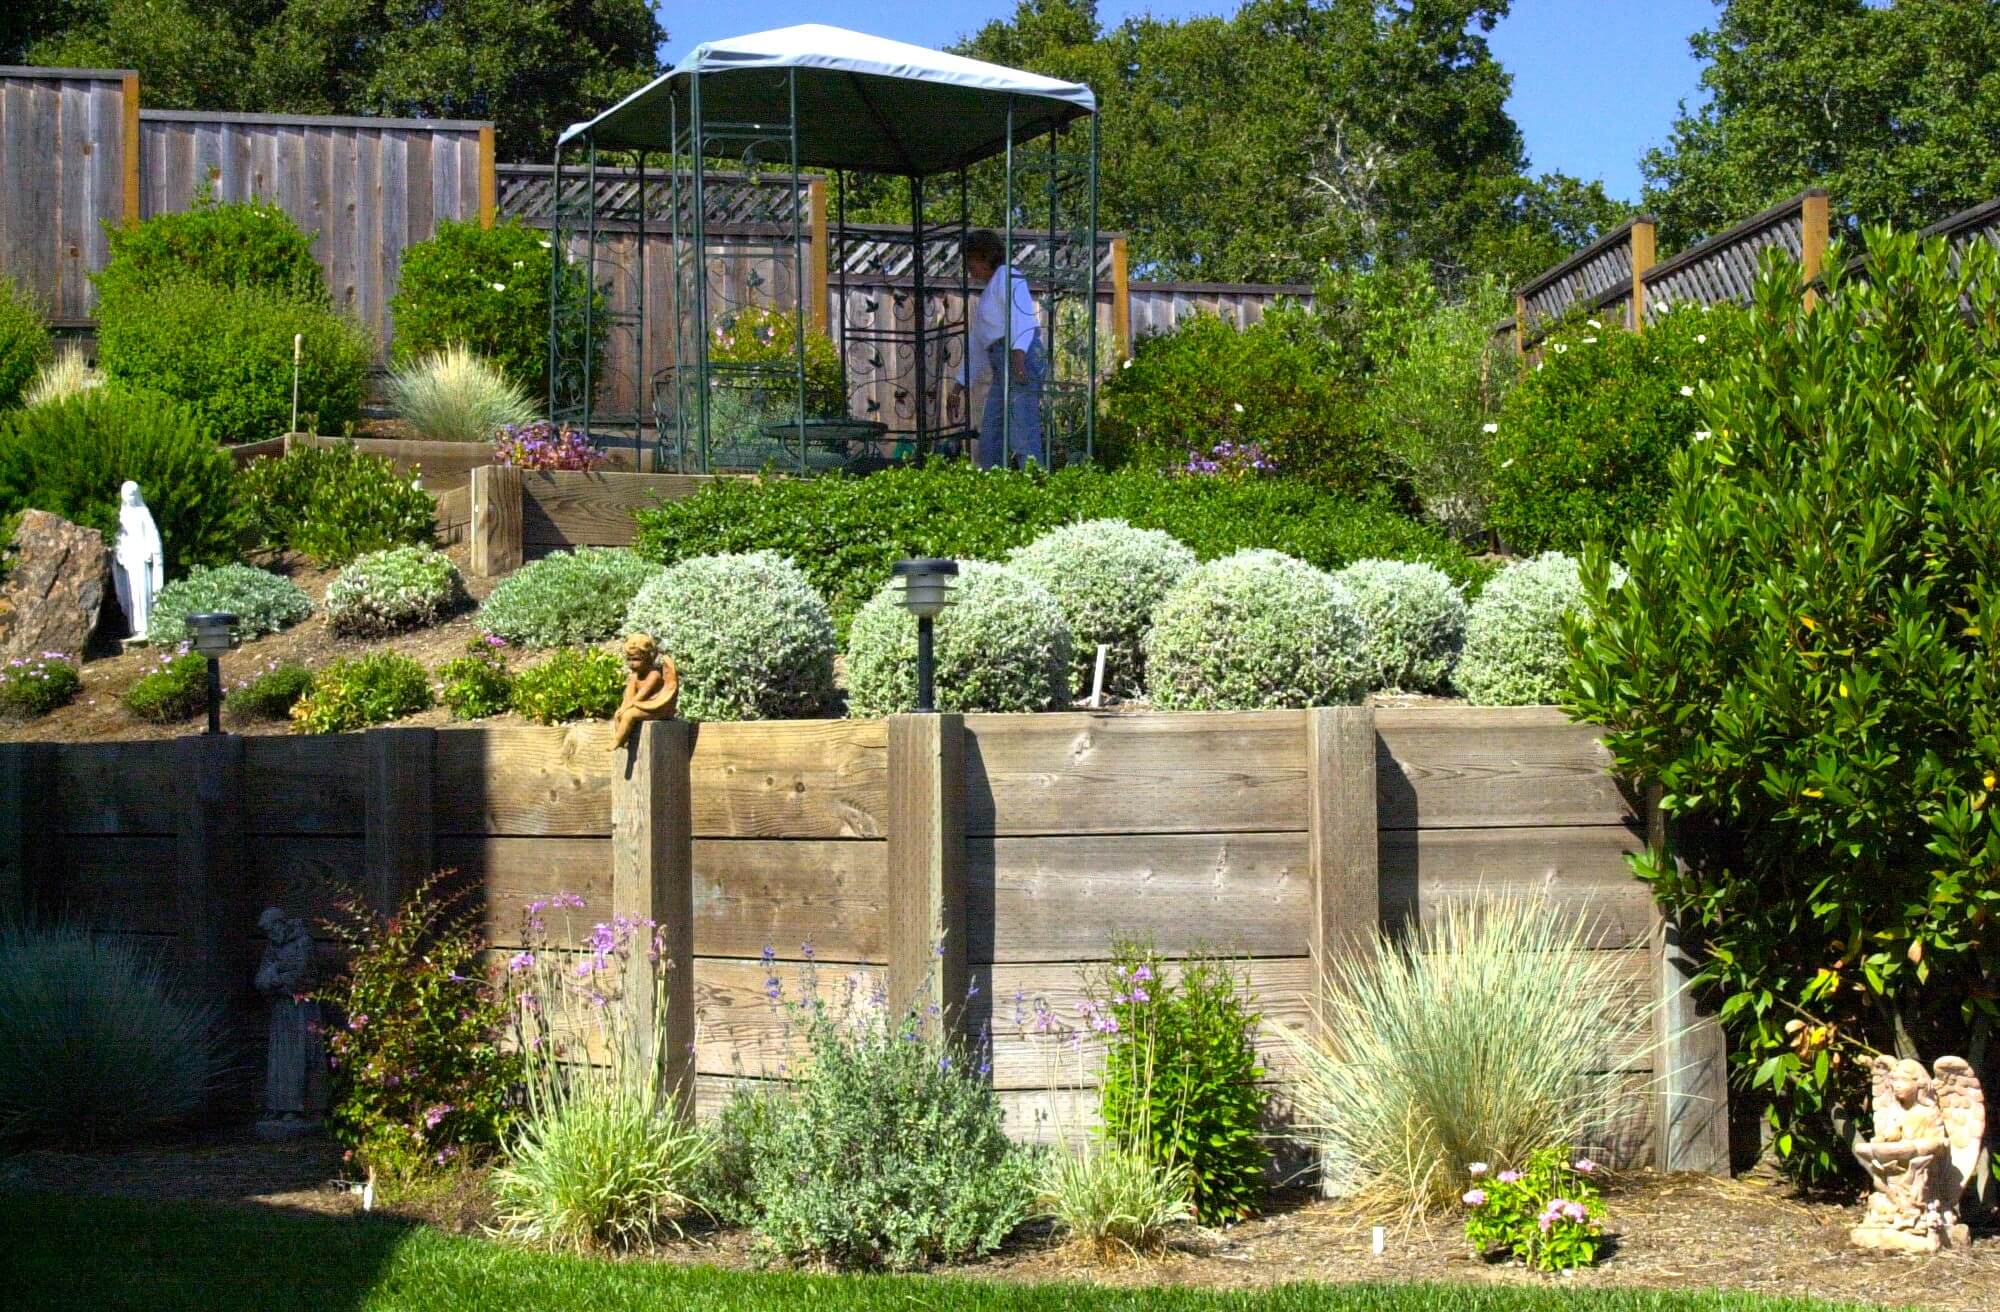 Wide wood plank retaining wall in landscaped backyard with tiered garden above